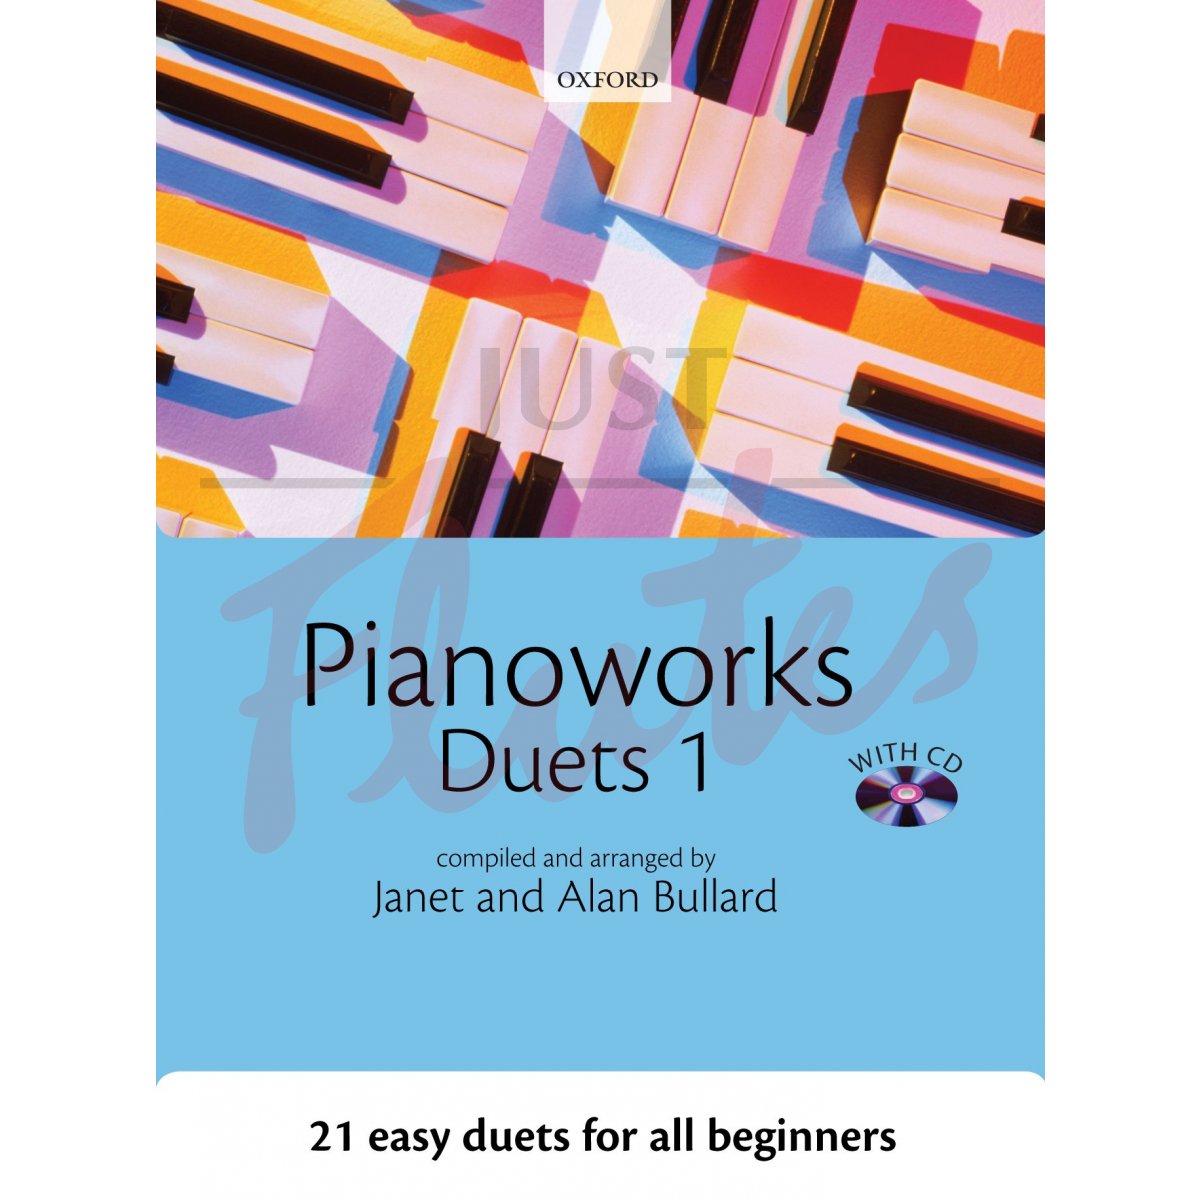 Pianoworks - Duets 1